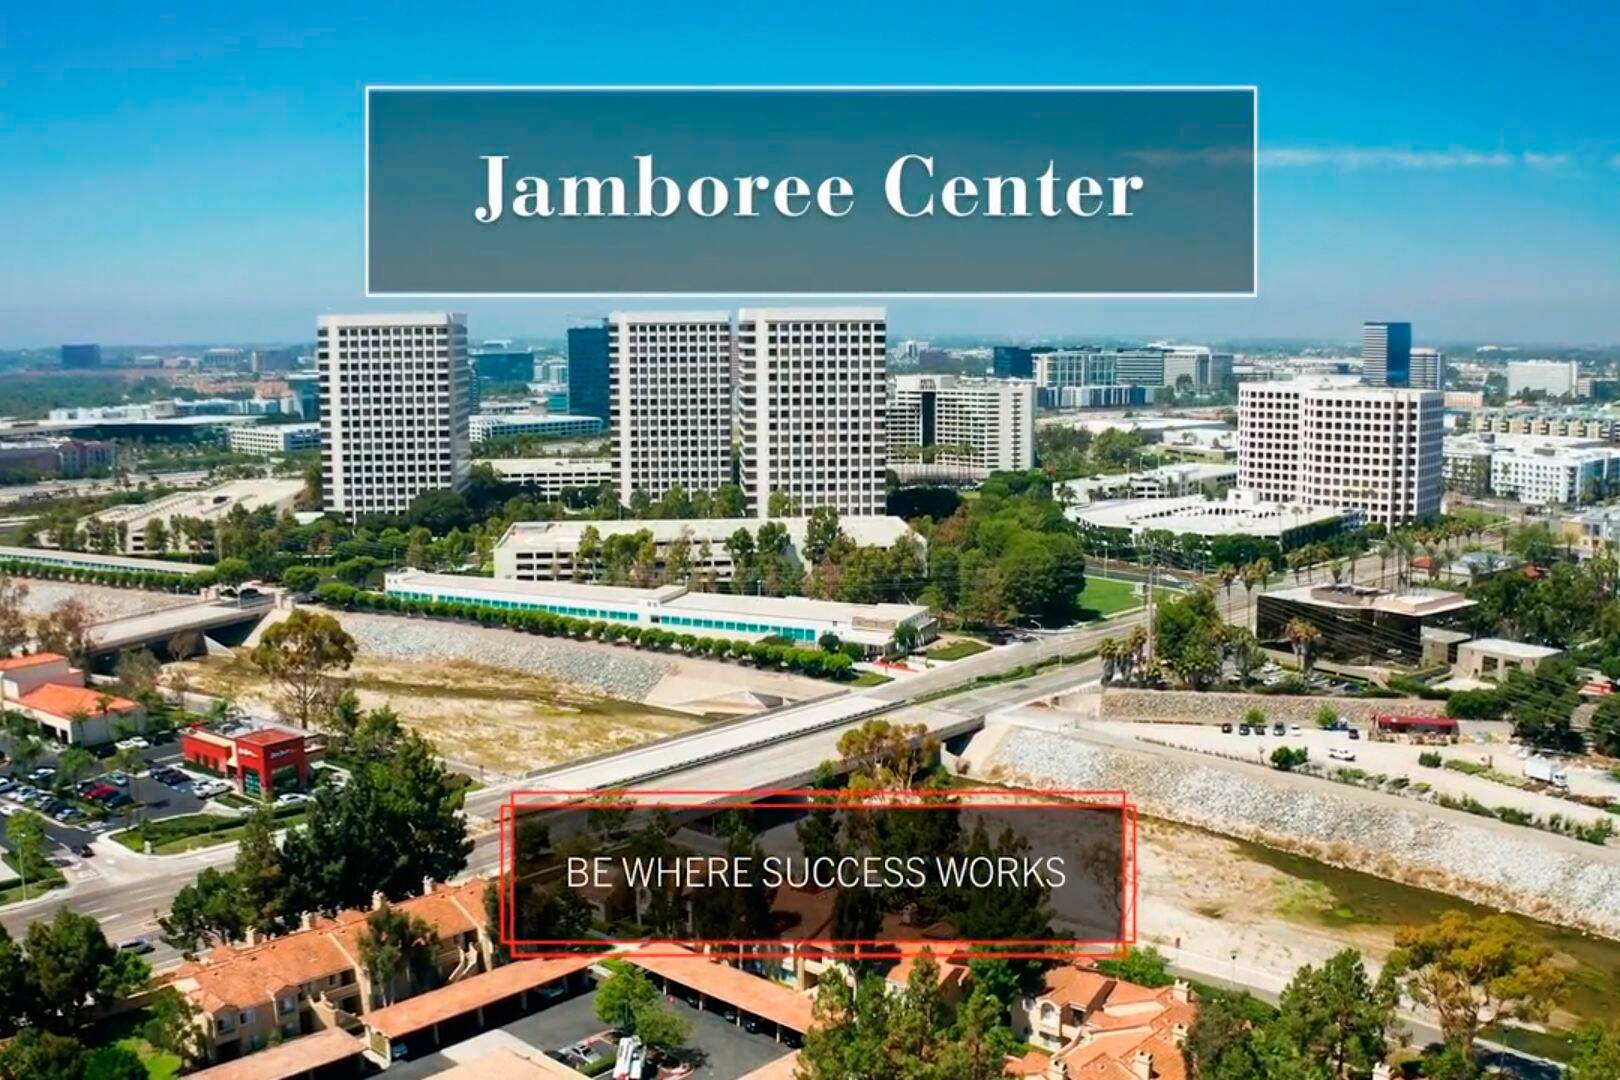 Preview image for the video showcasing Jamboree Center in Irvine, CA